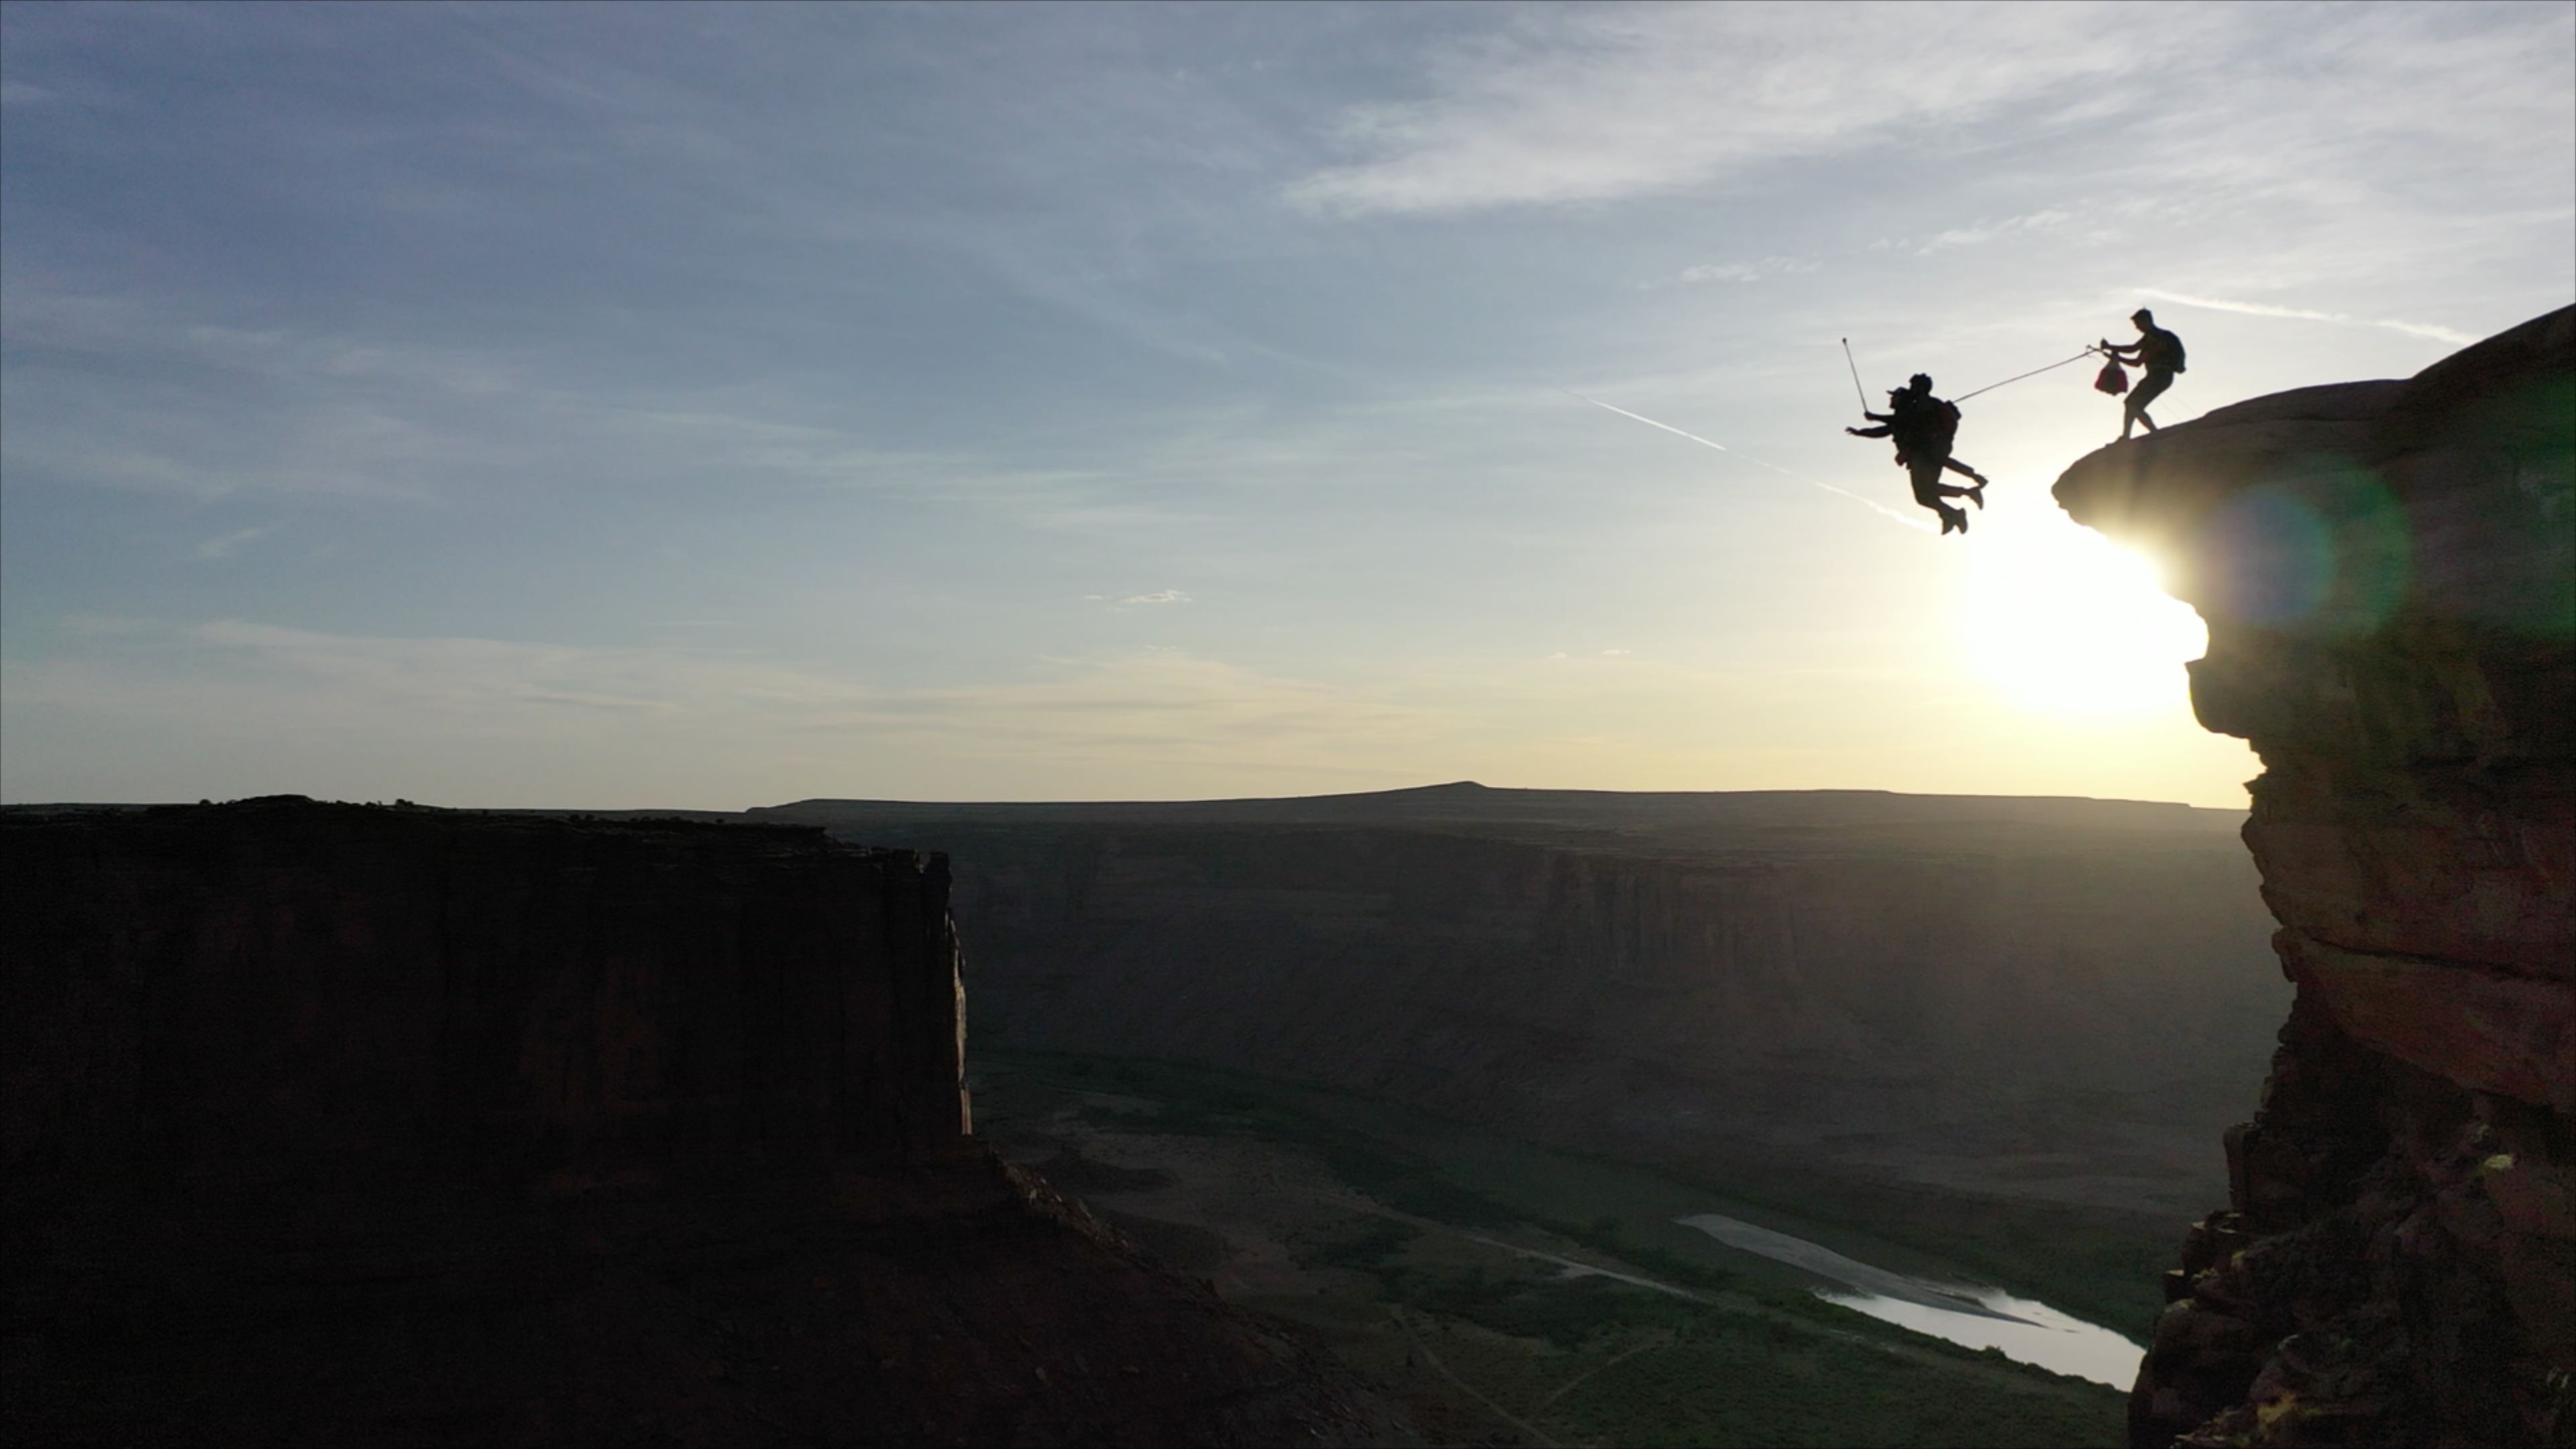 BASE Jumping: Jumping from a cliff, Tandem jumping, Extreme sport. 3840x2160 4K Wallpaper.